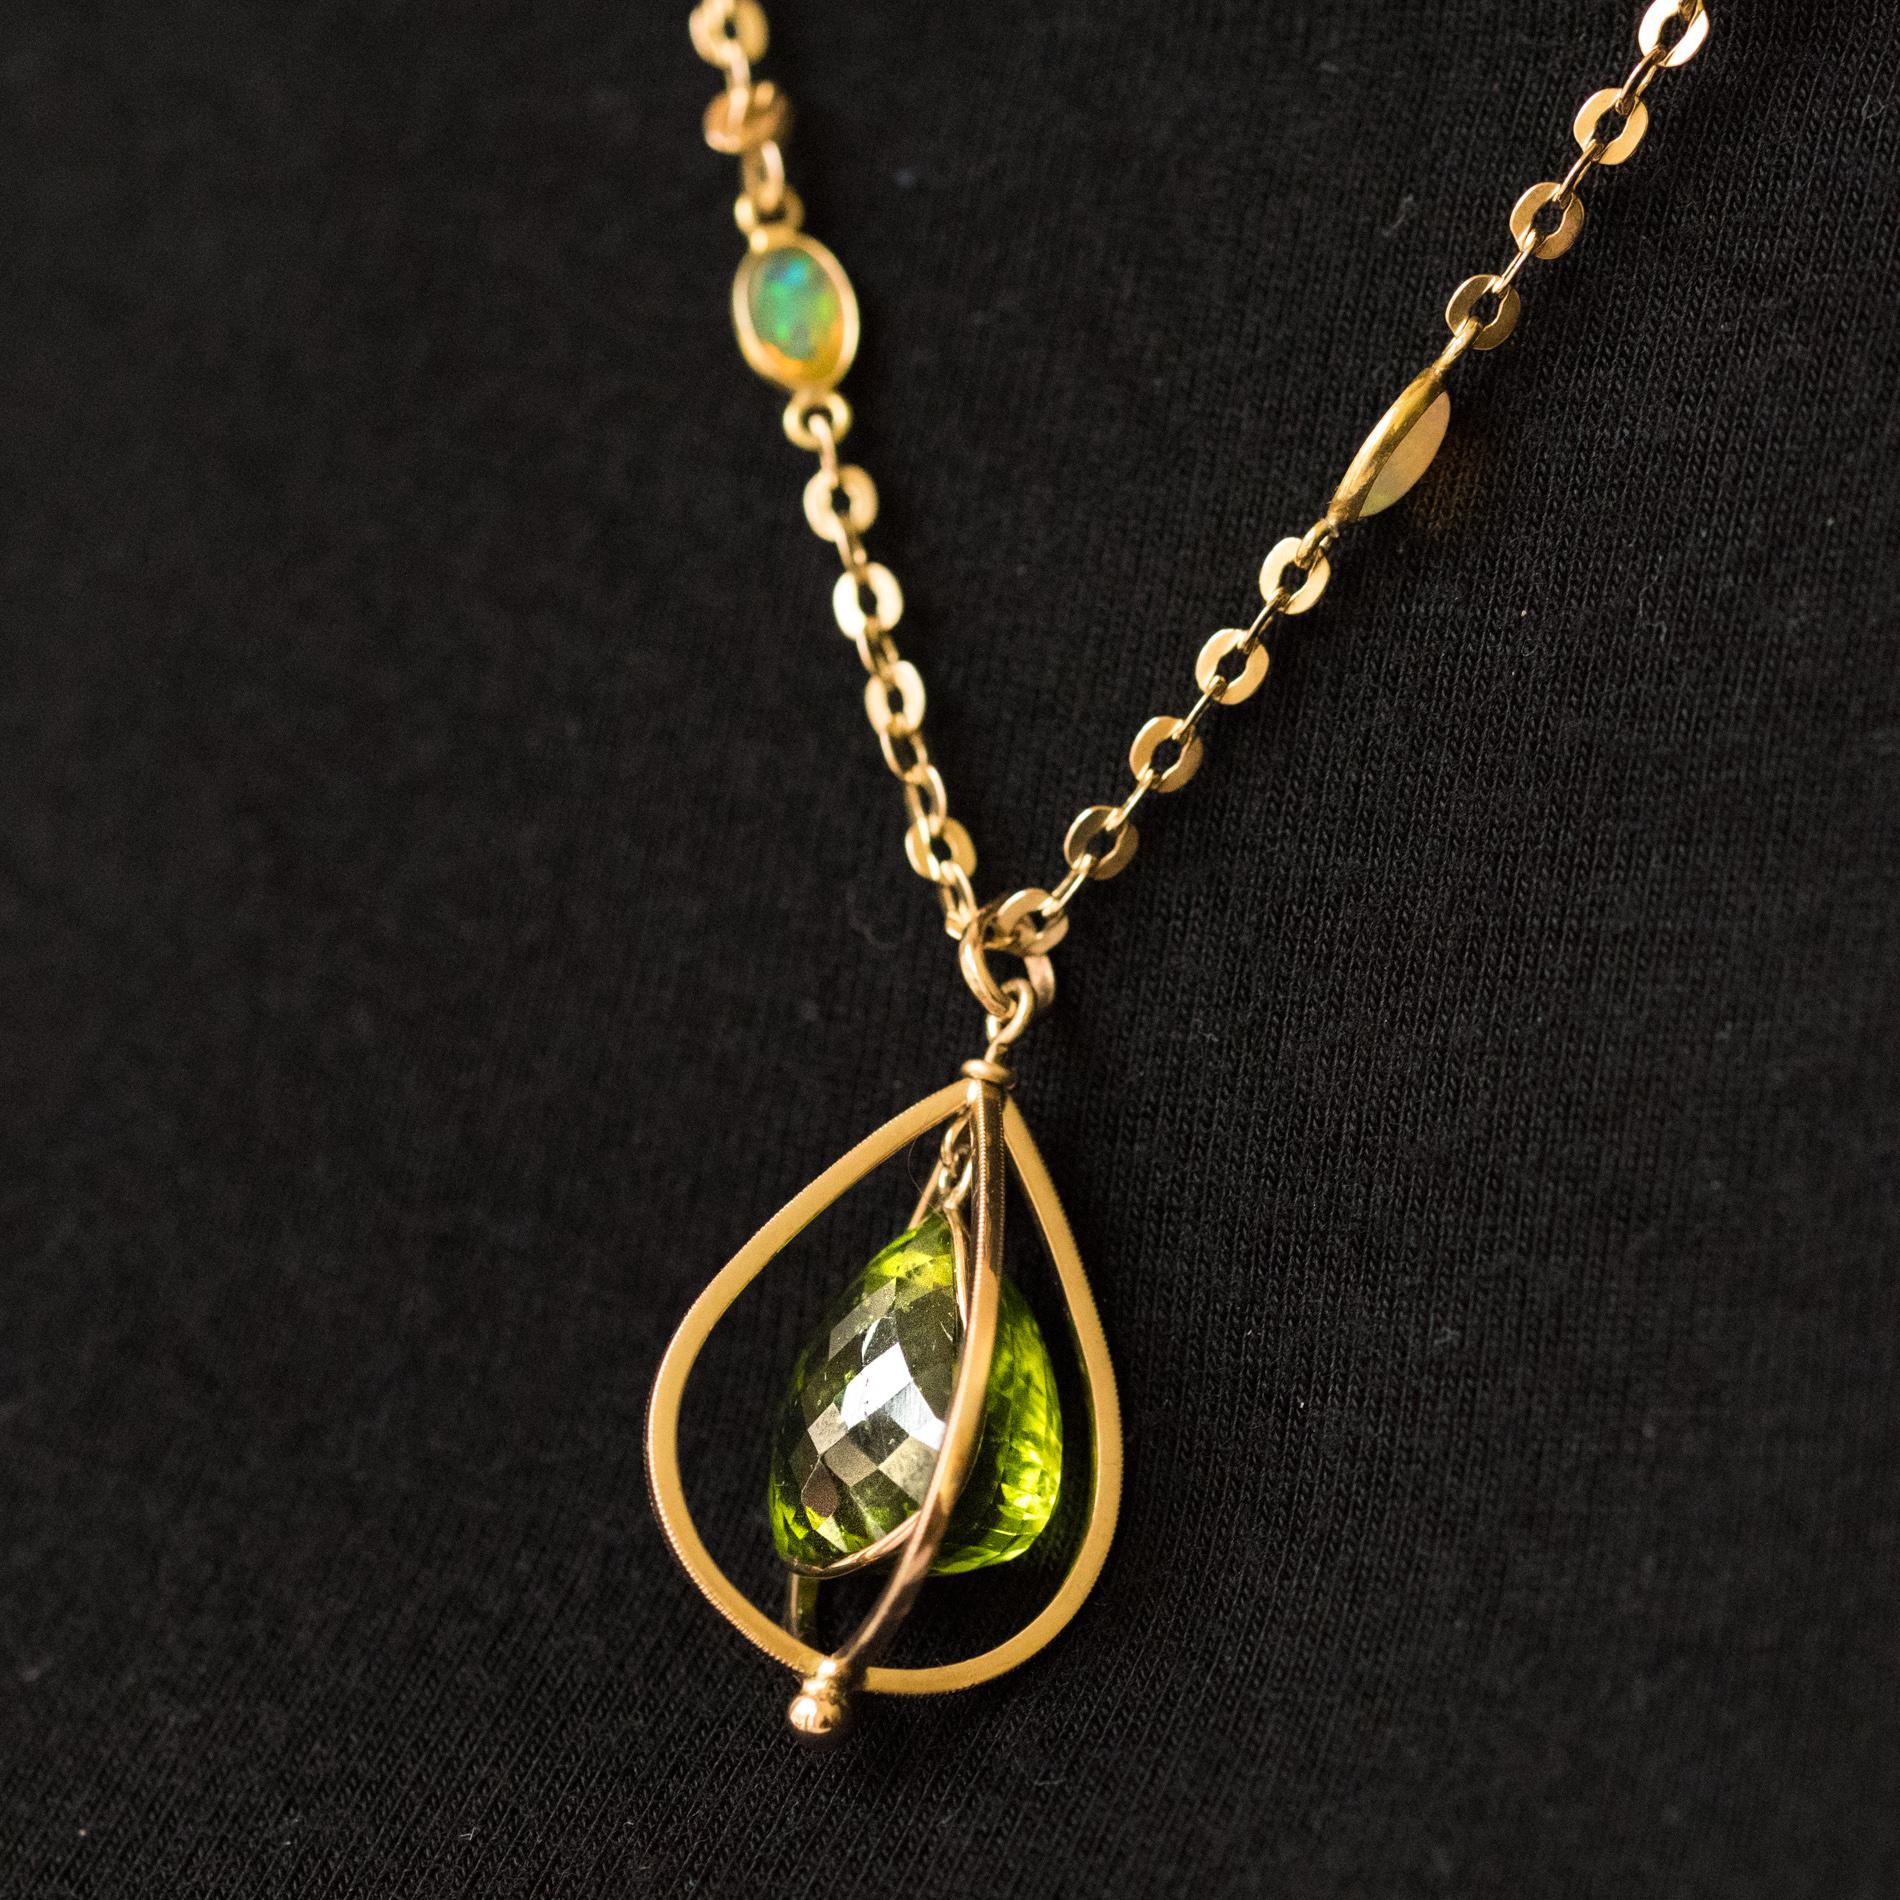 New 12, 1 Carats Peridot Pendant Chain Set with Opals Necklace 2